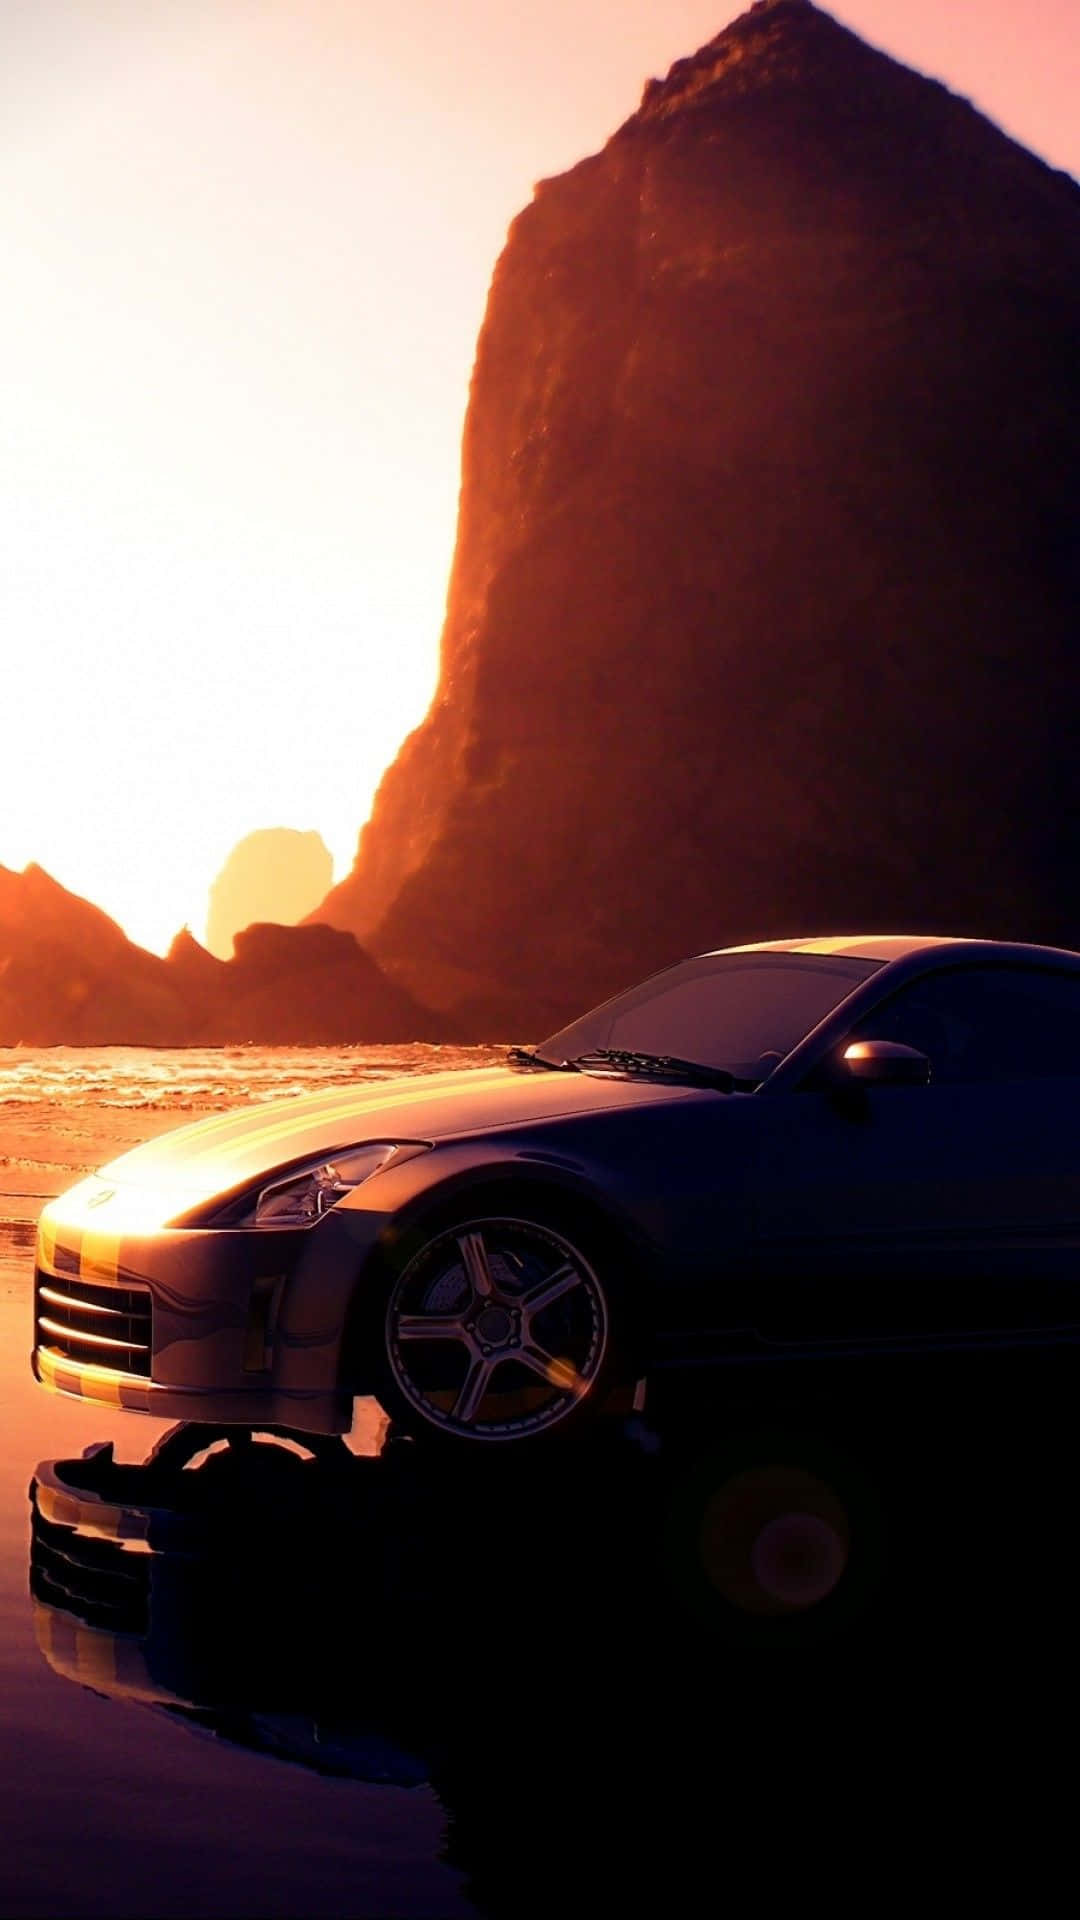 Customized Nissan 350z on the iPhone Wallpaper